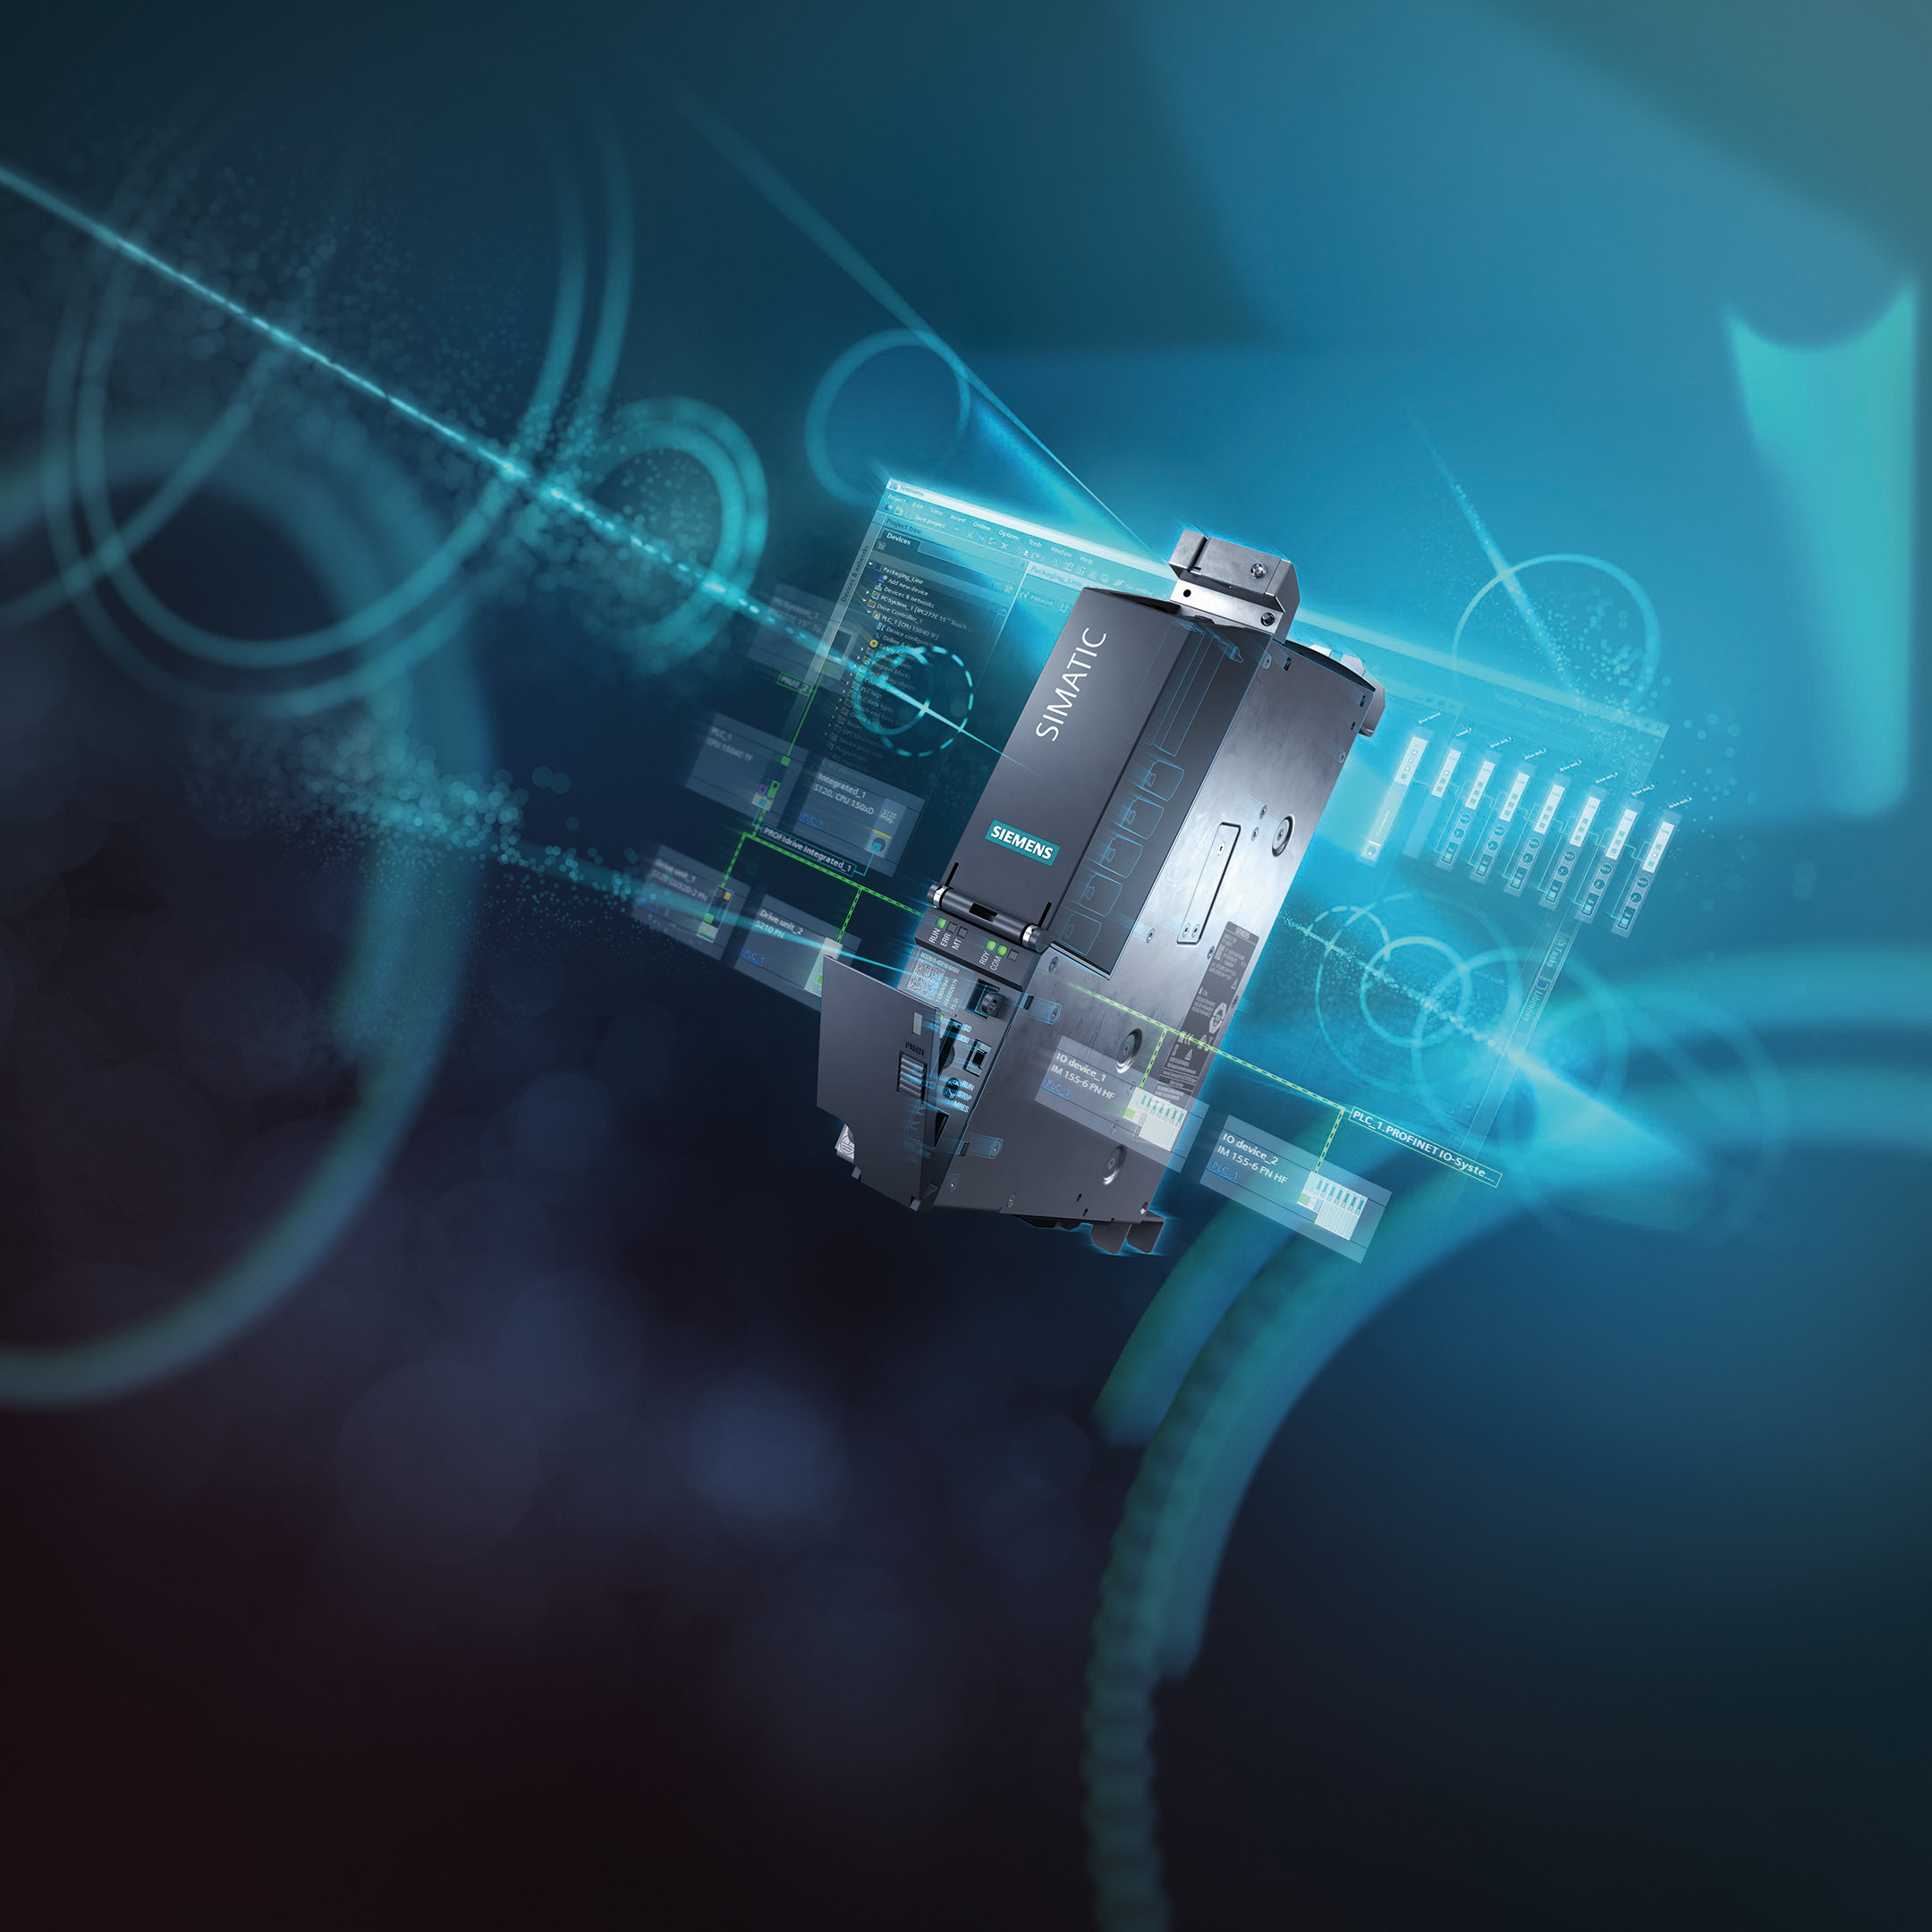 Siemens: Simatic motion controller with integrated drive control, Manufacturing, Automation. 2160x2160 HD Wallpaper.